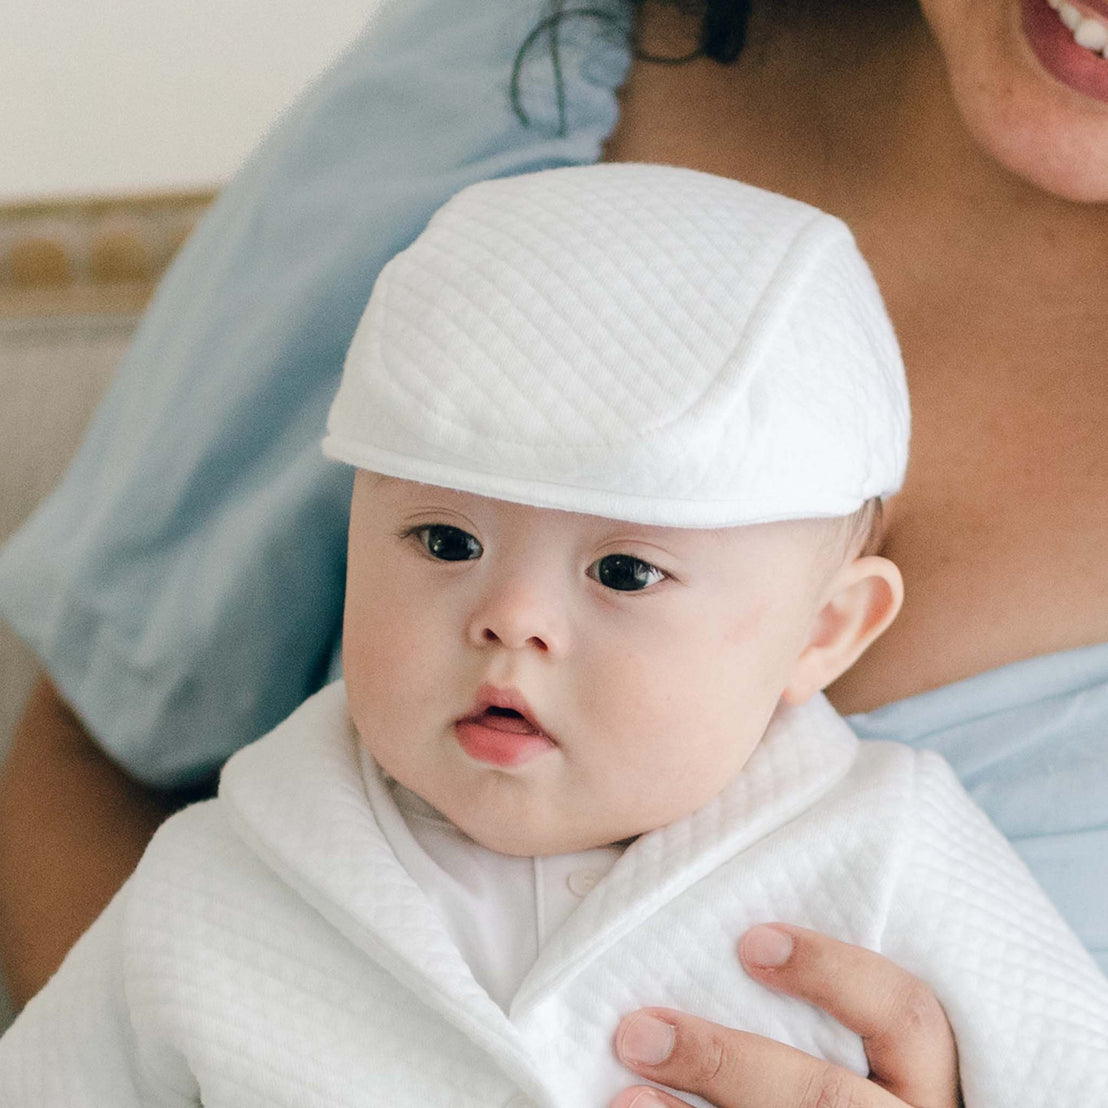 Baby boy sitting on his mother's lap and wearing the Elijah Newsboy Cap. The photo features the top and sides of the hat of the hat in the "newsboy" style in a white textured cotton.